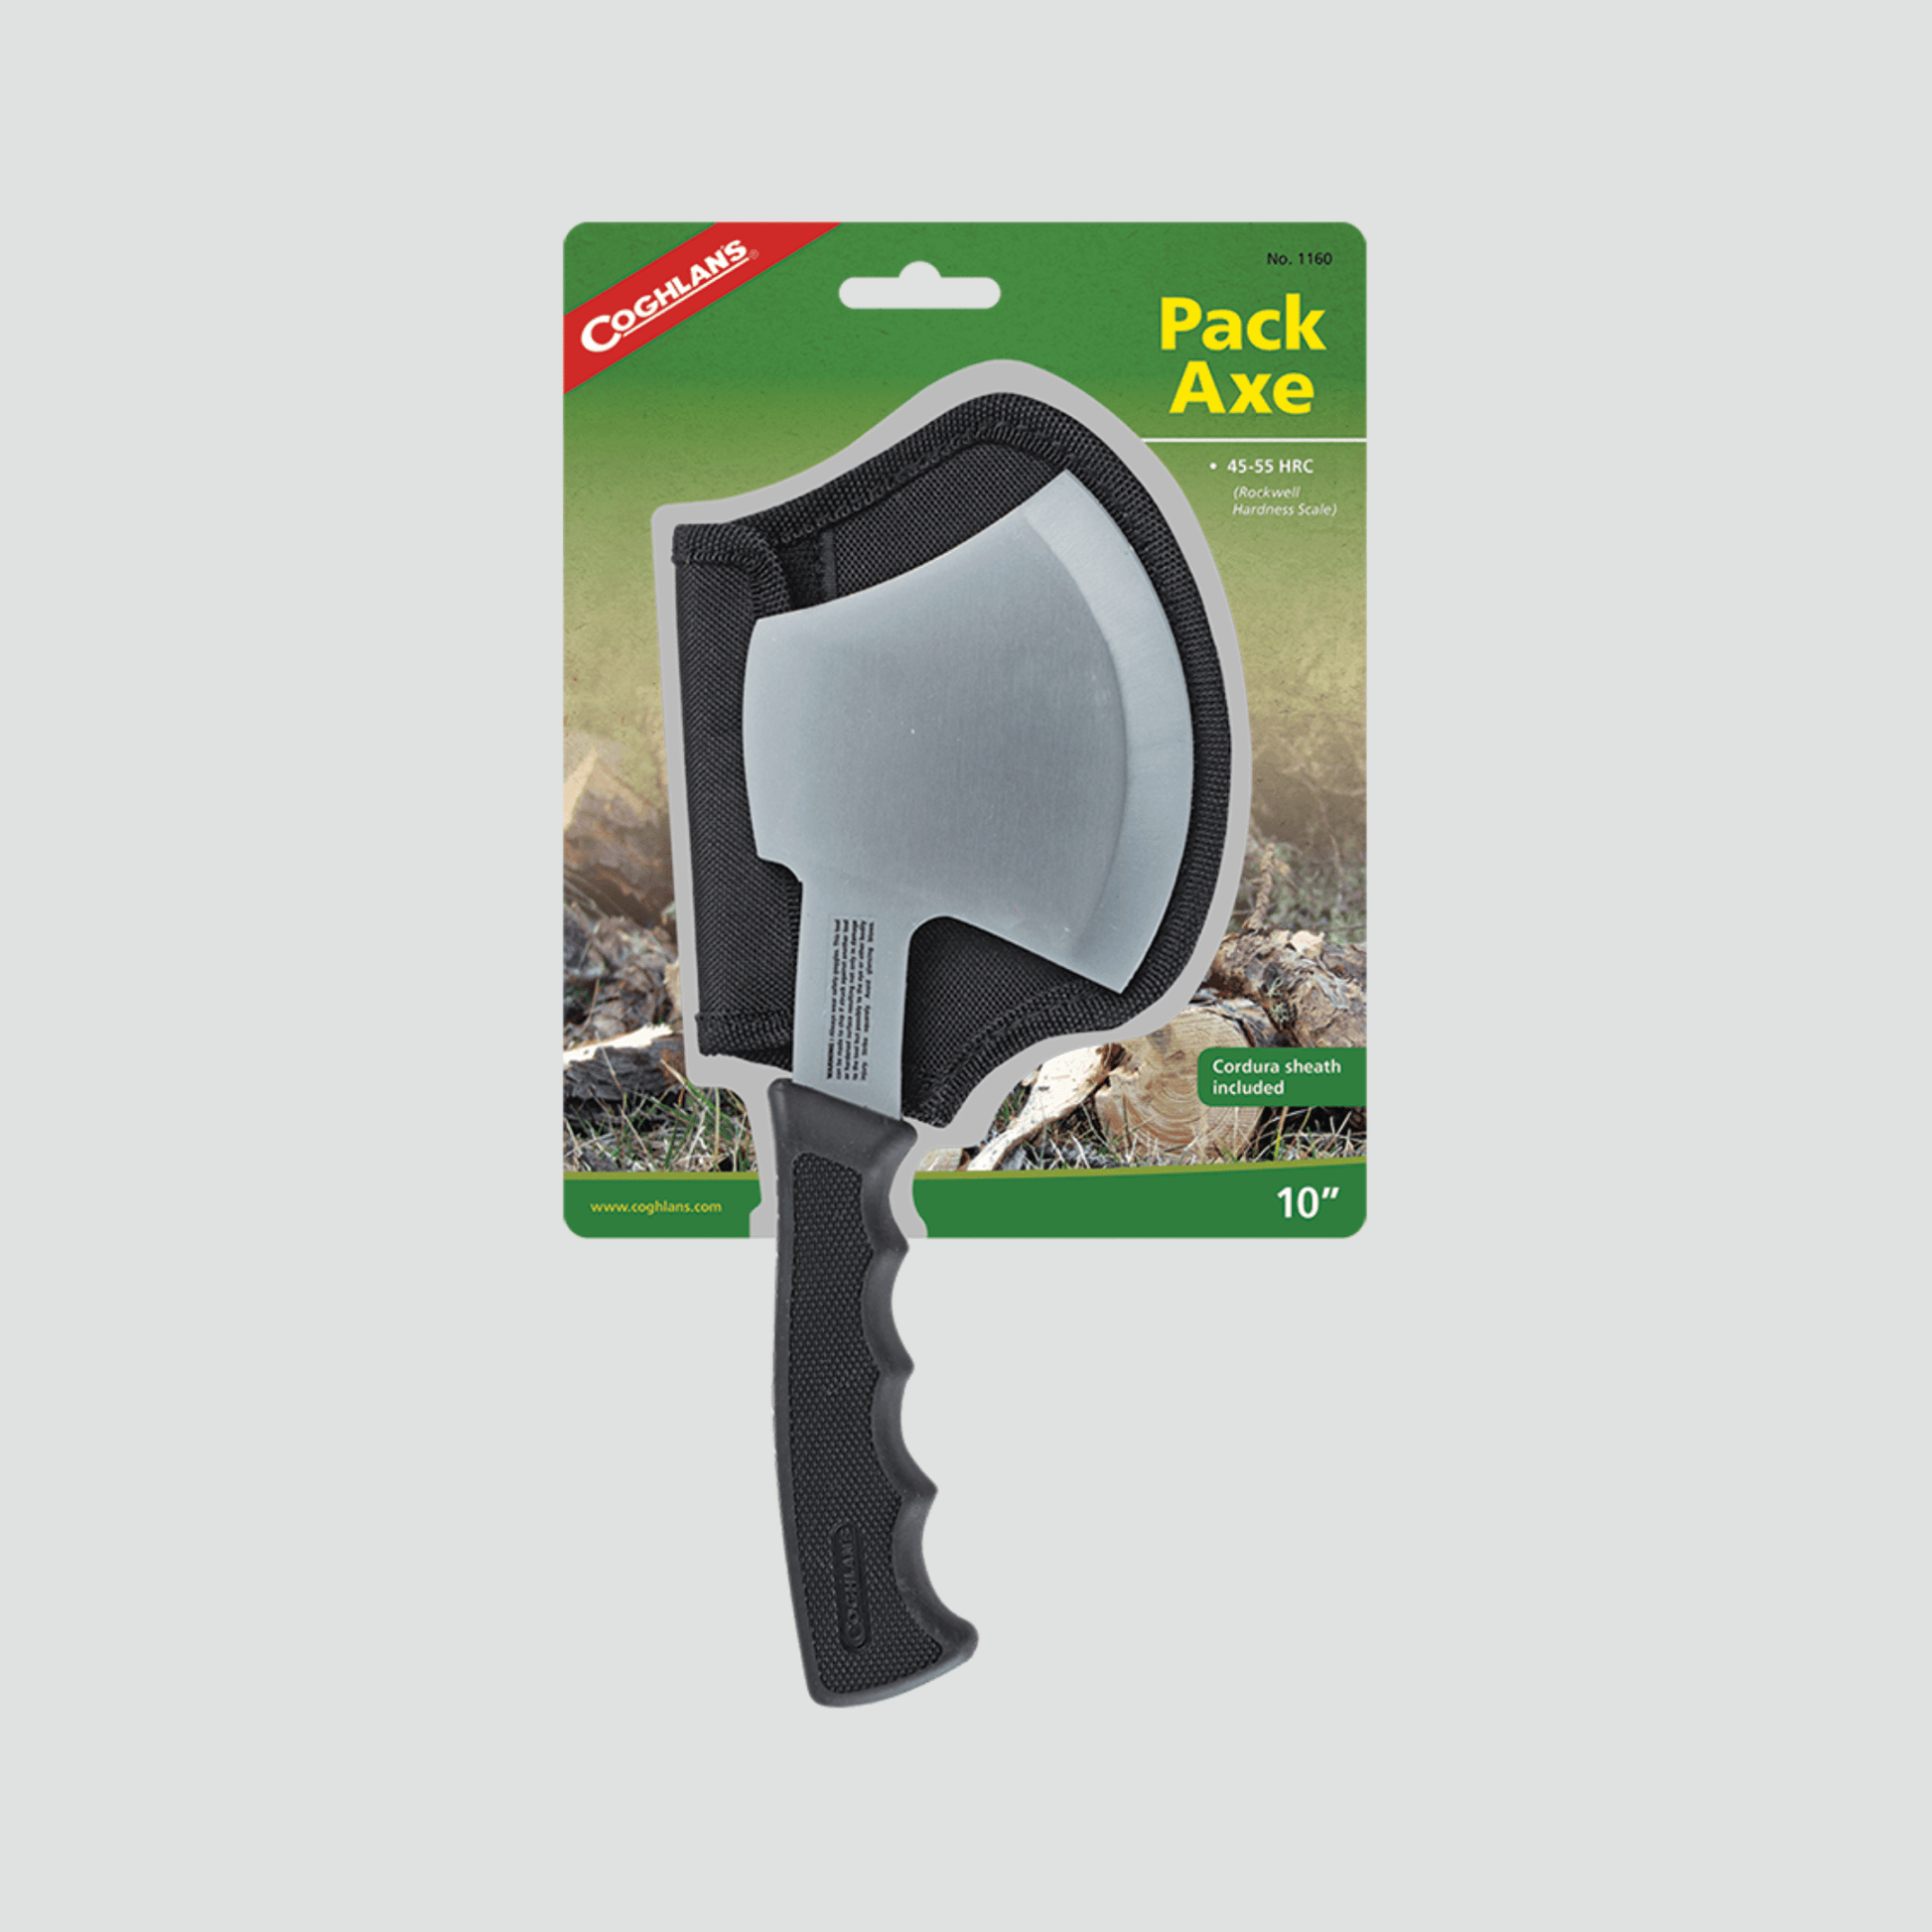 Pack Axe with black handle